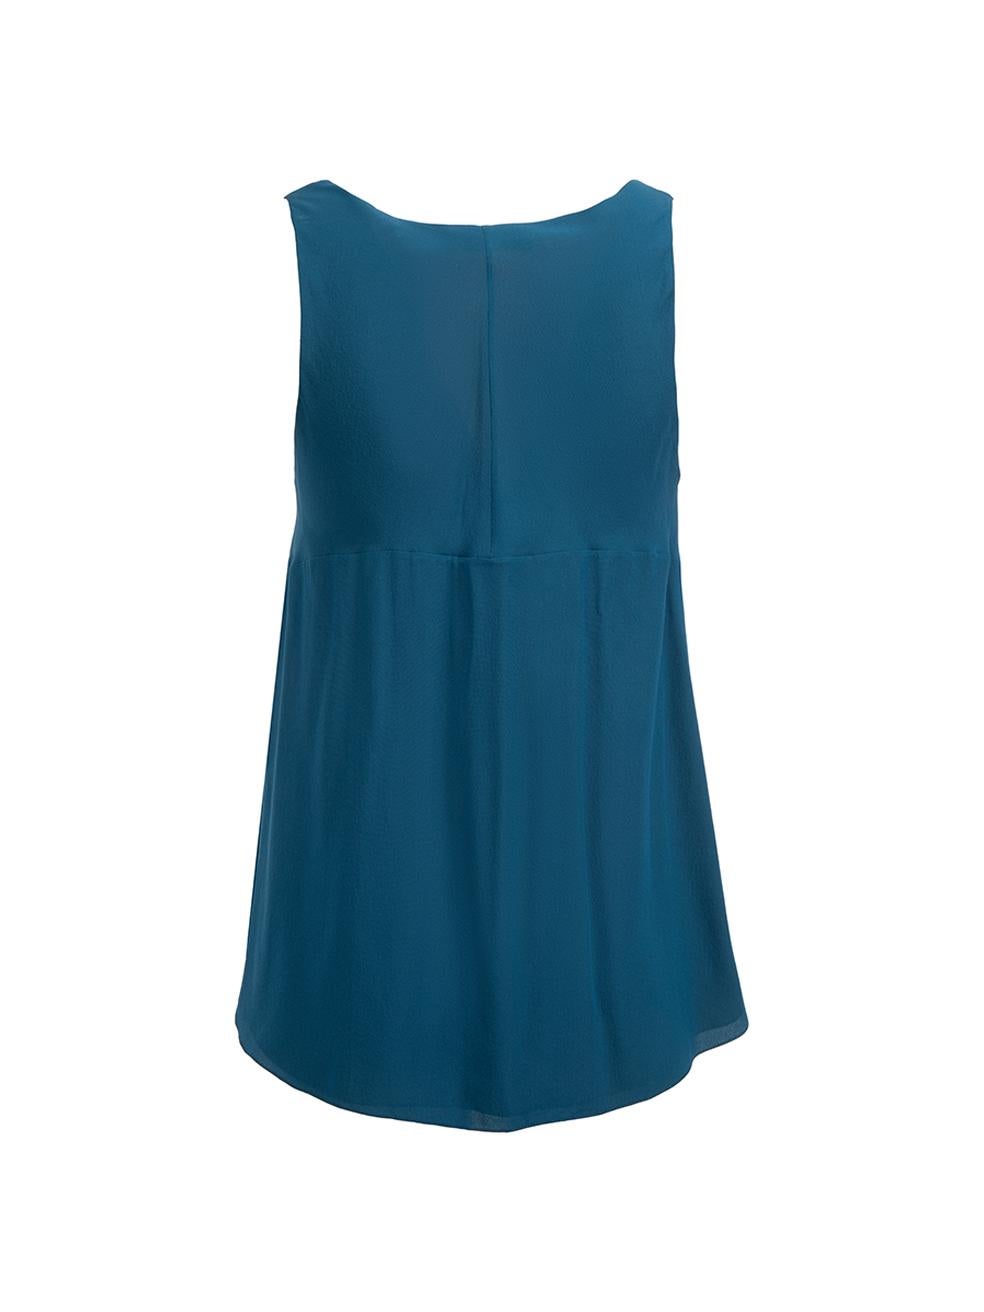 Chloé Blue Silk Sleeveless Loose Fit Top Size XS In Excellent Condition For Sale In London, GB